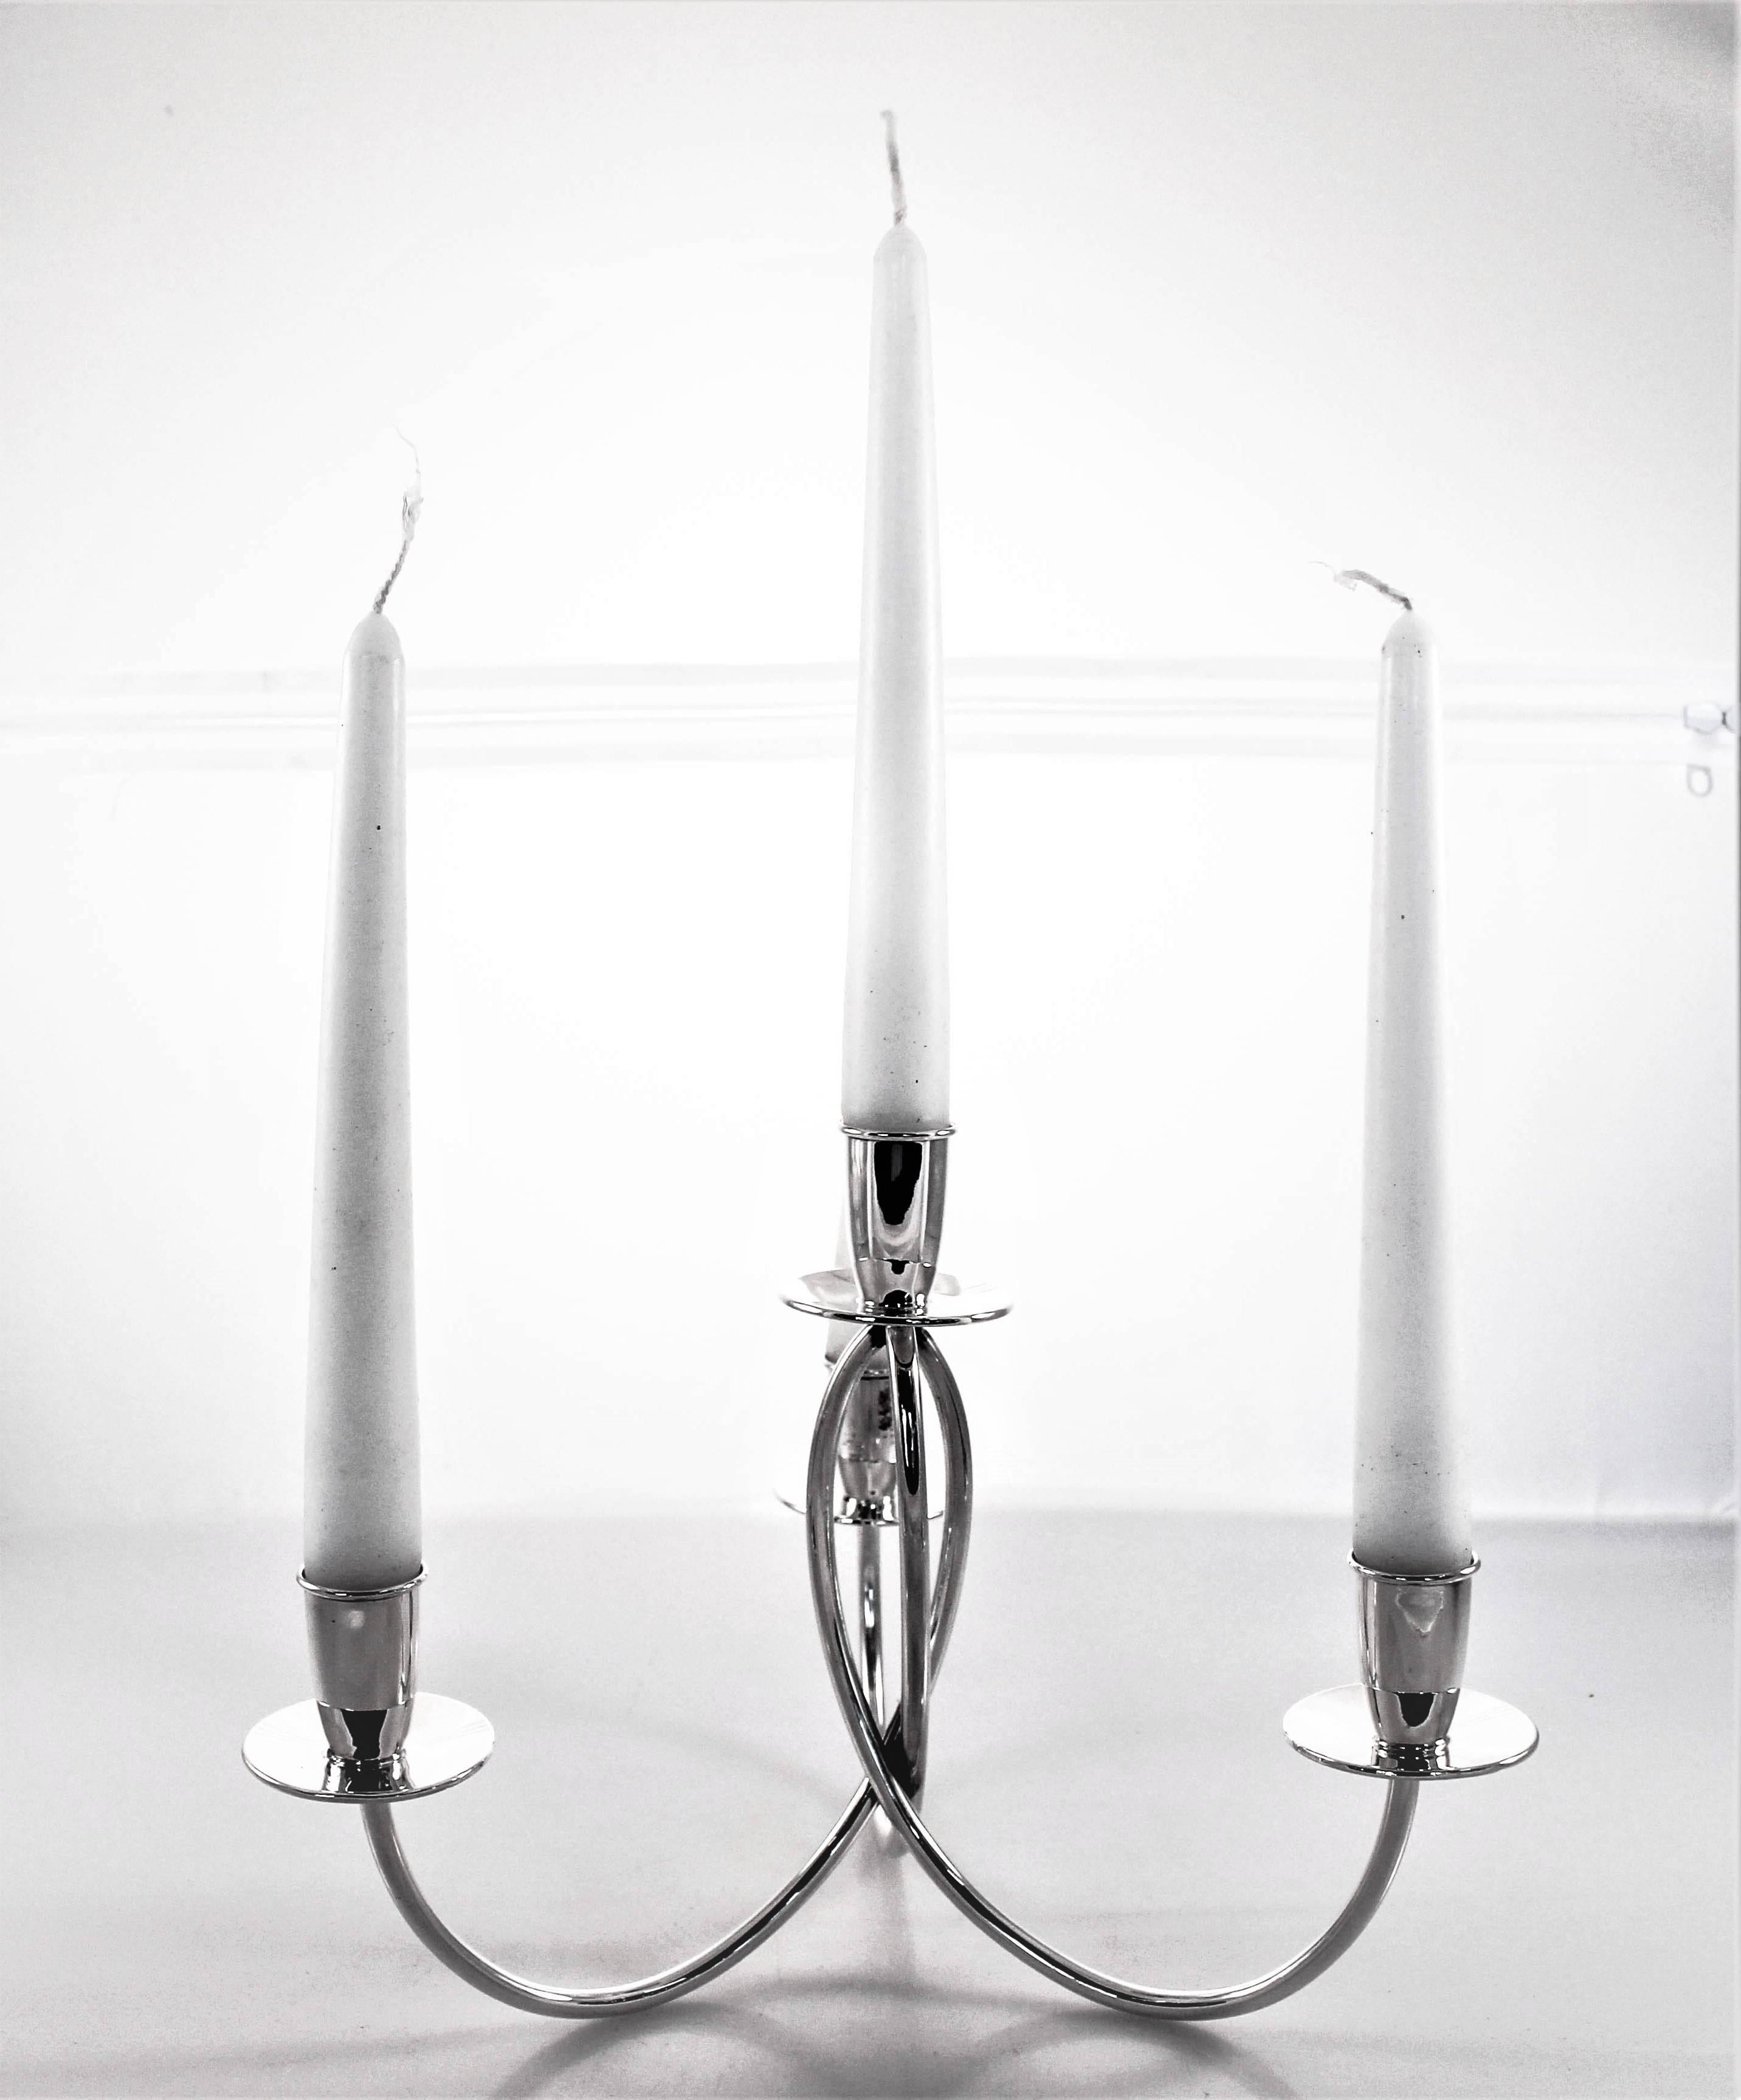 Proudly offering this pair of Mid-Century Modern candelabras. They have a chic and understated look to them. The arms and bobeches are unadorned; just a simple twist in the centre gives them all the design they need. Midcentury is all about